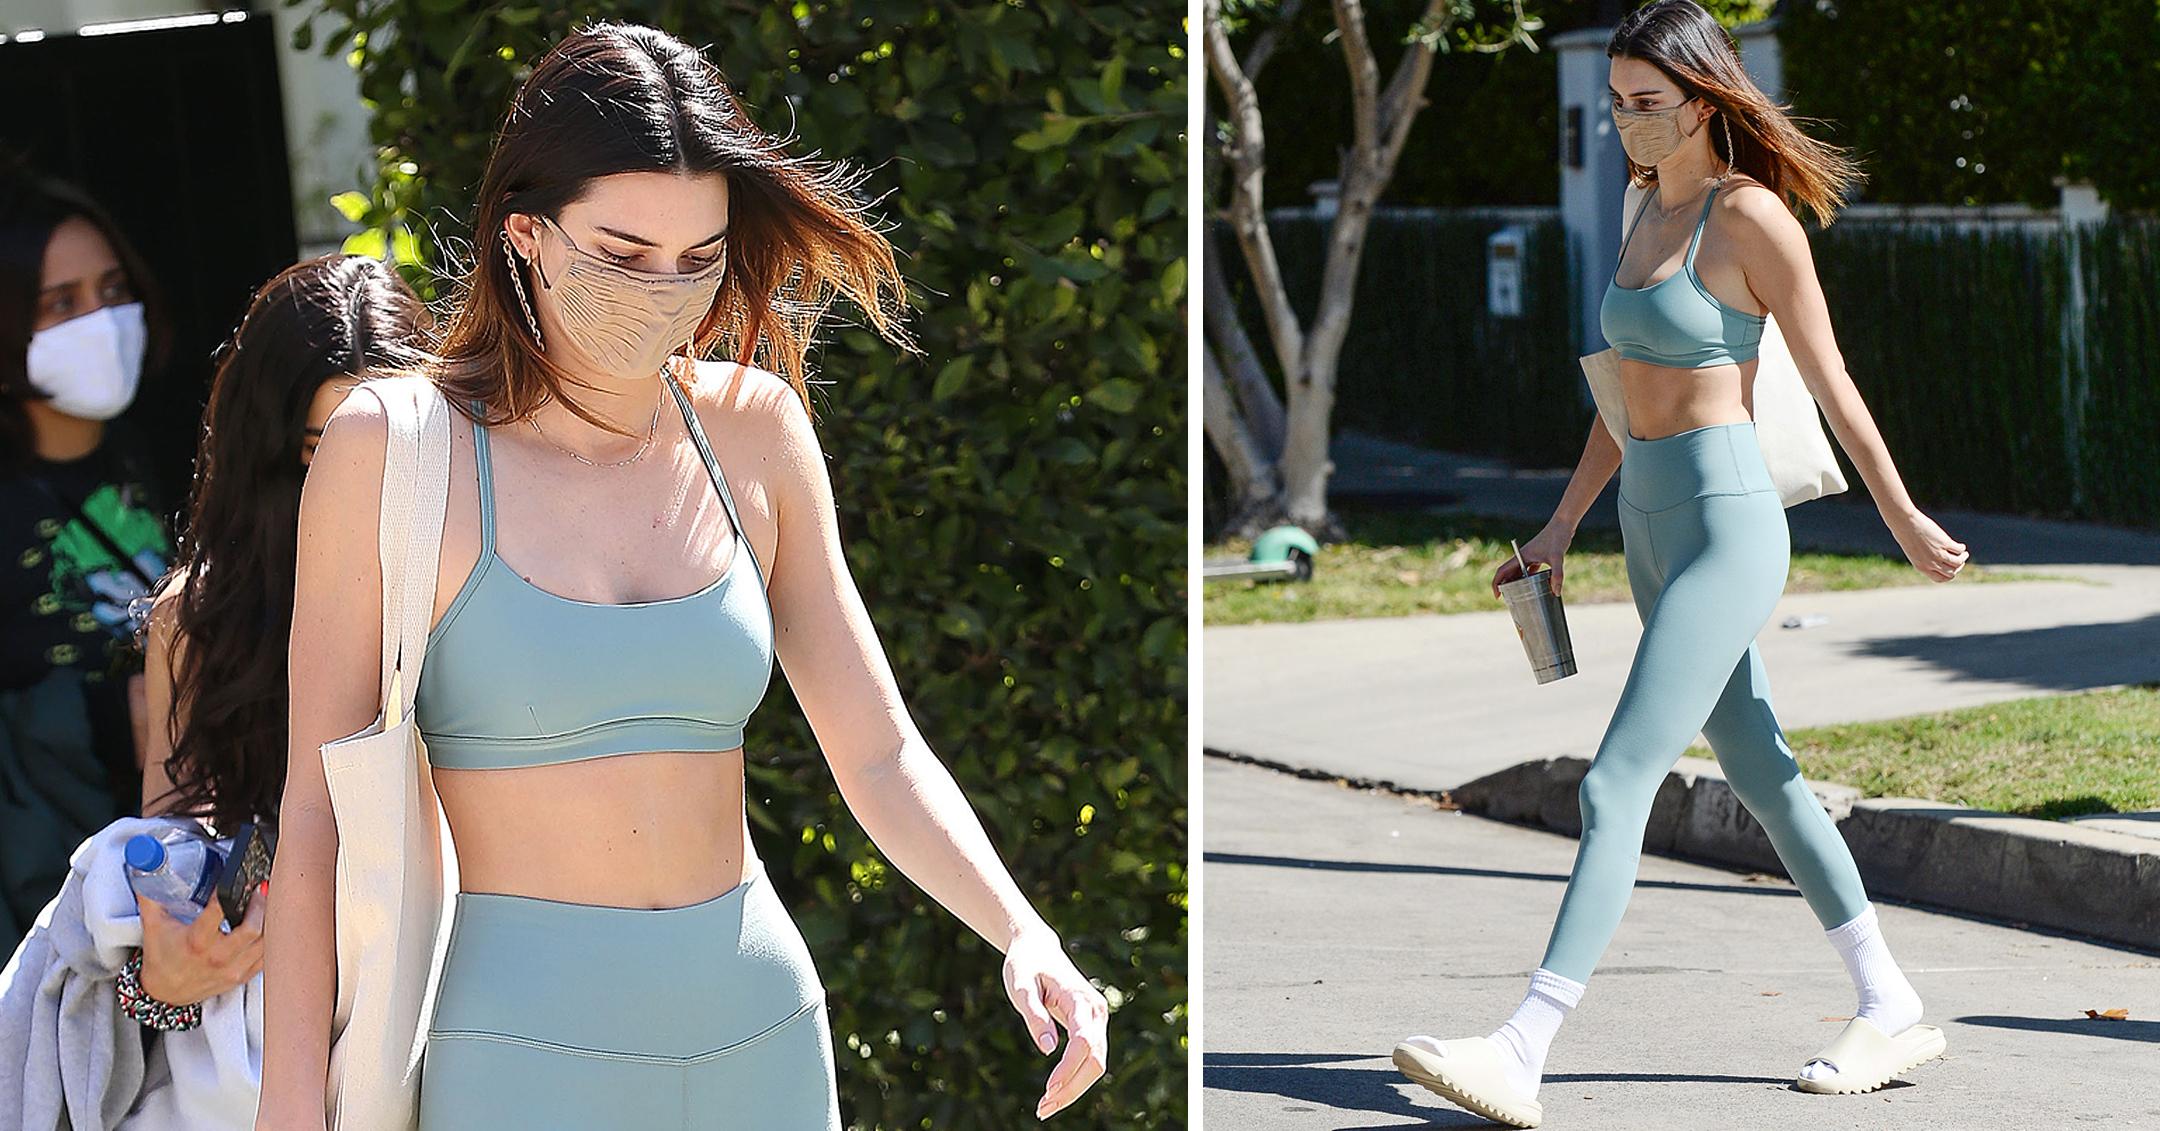 Kendall Jenner Shows Off Flat Abs In Leggings And Crop Top: Photos